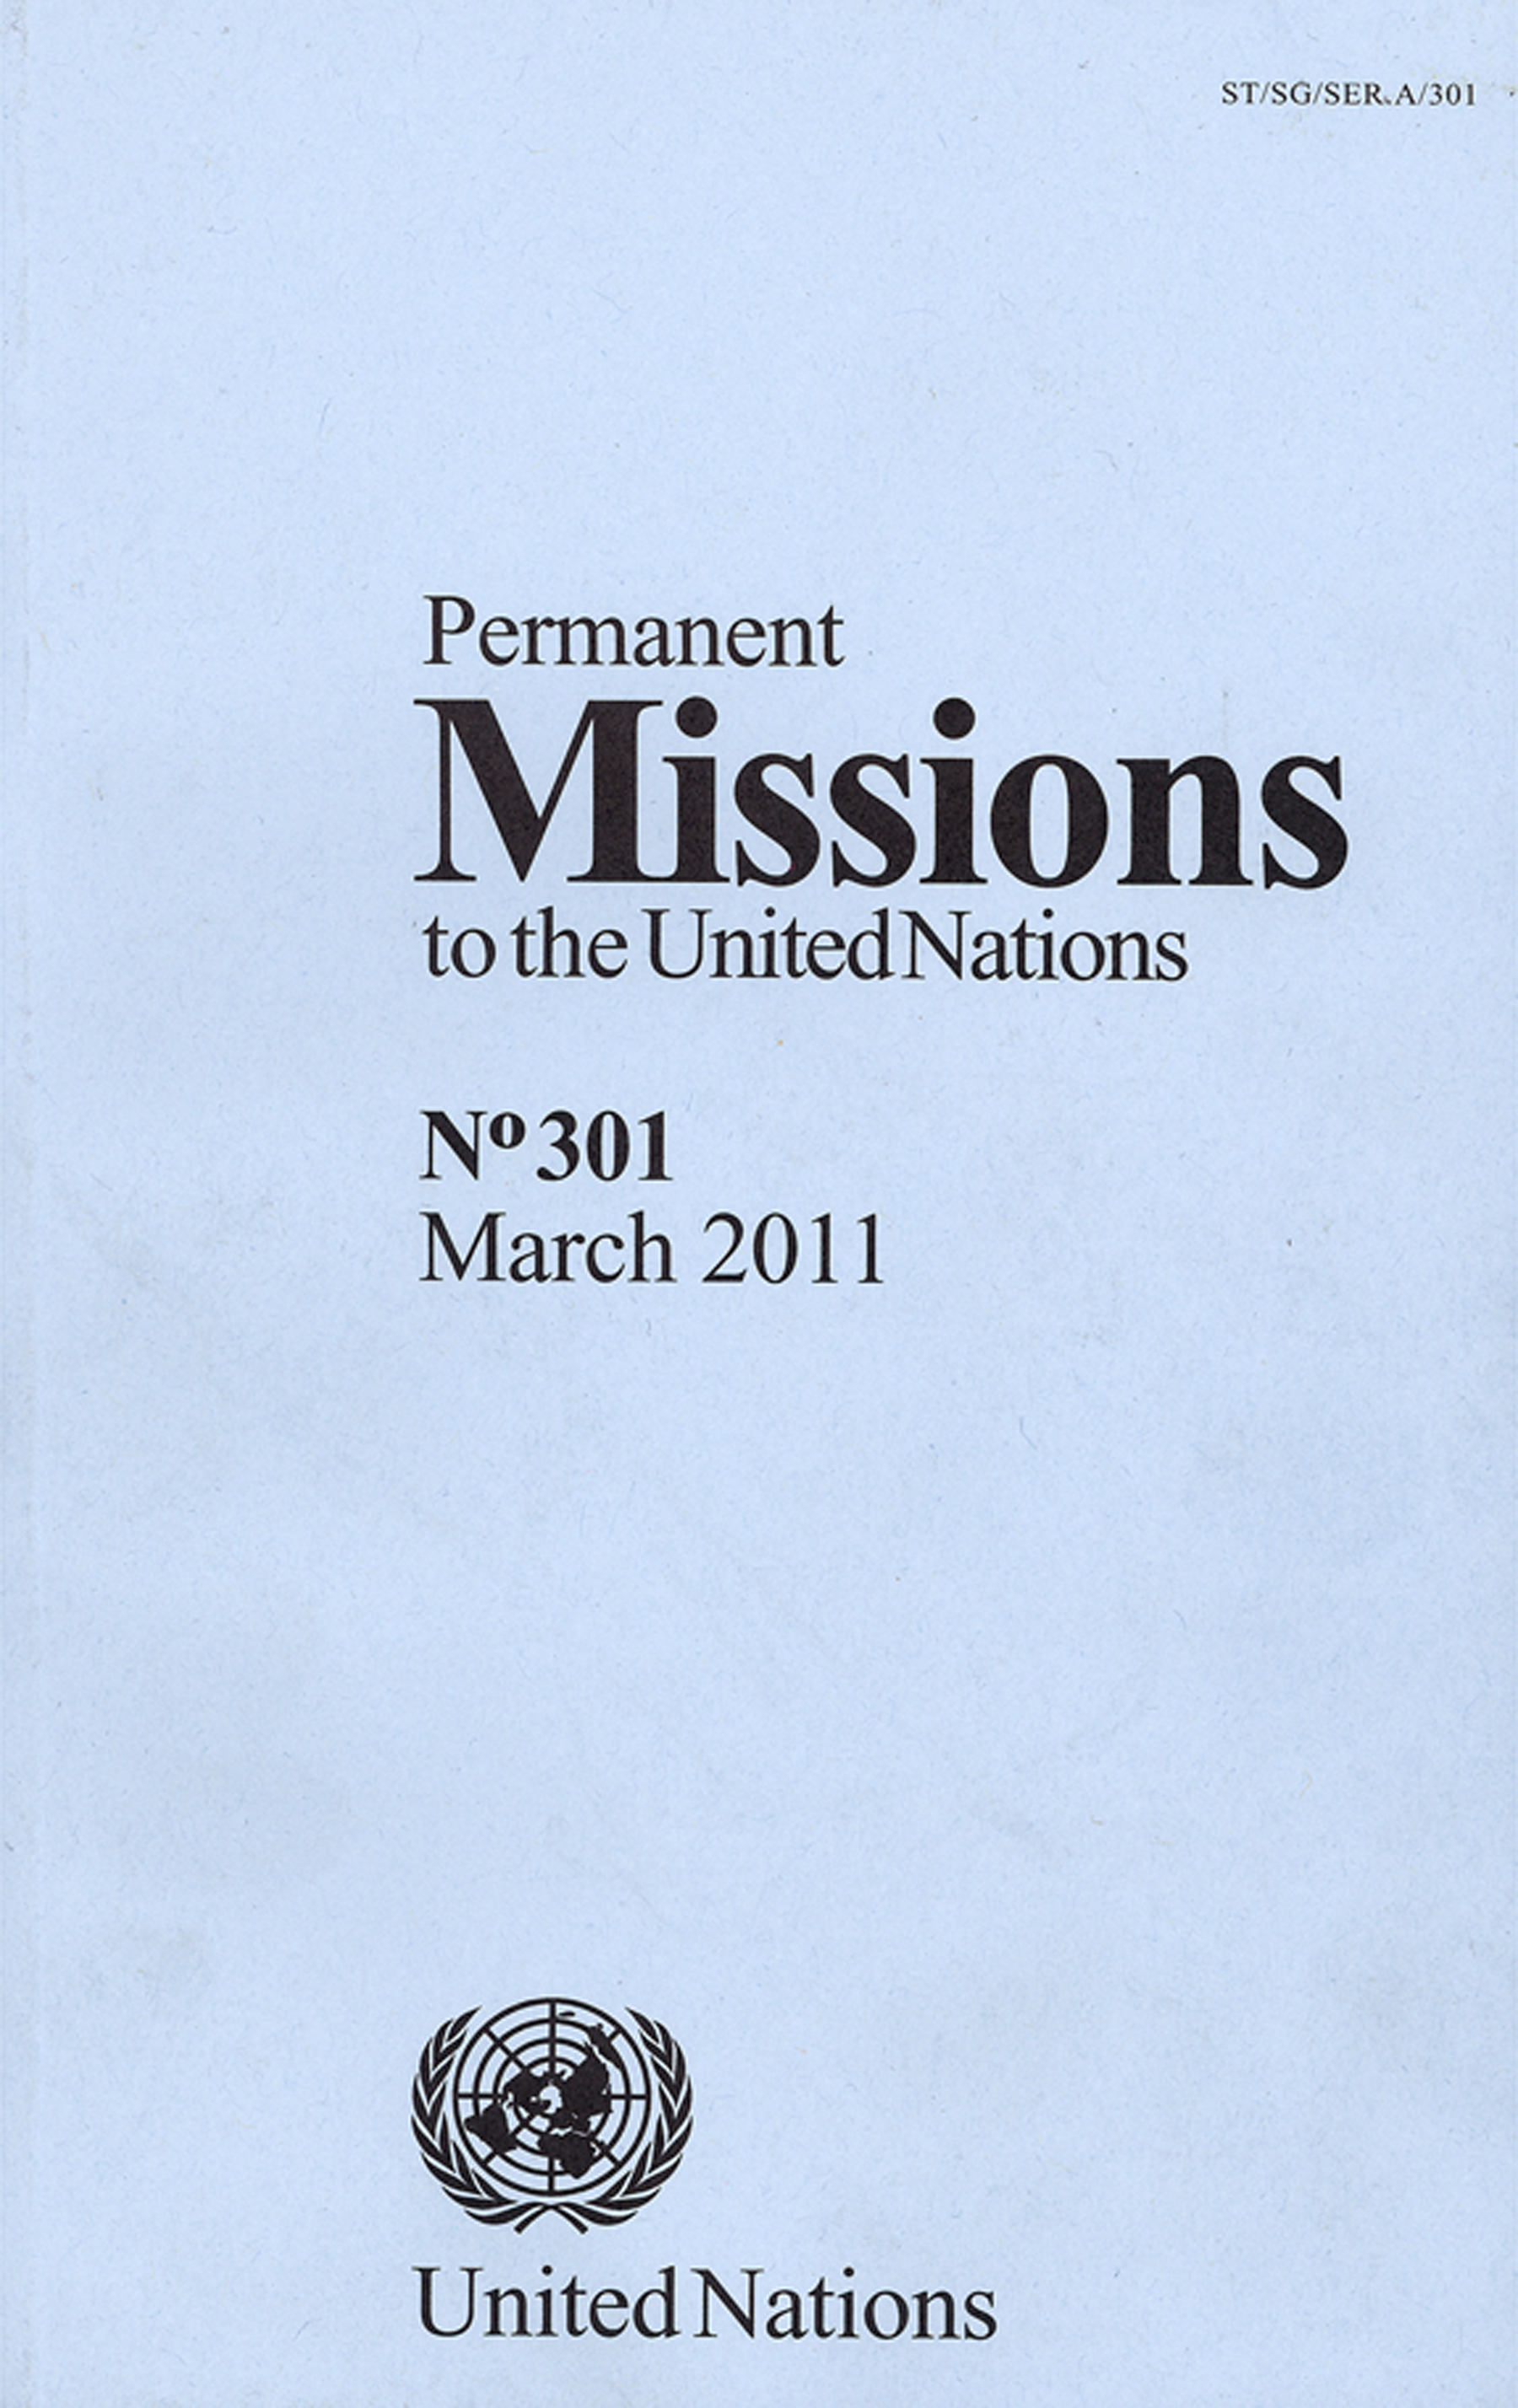 image of Permanent Missions to the United Nations No.301